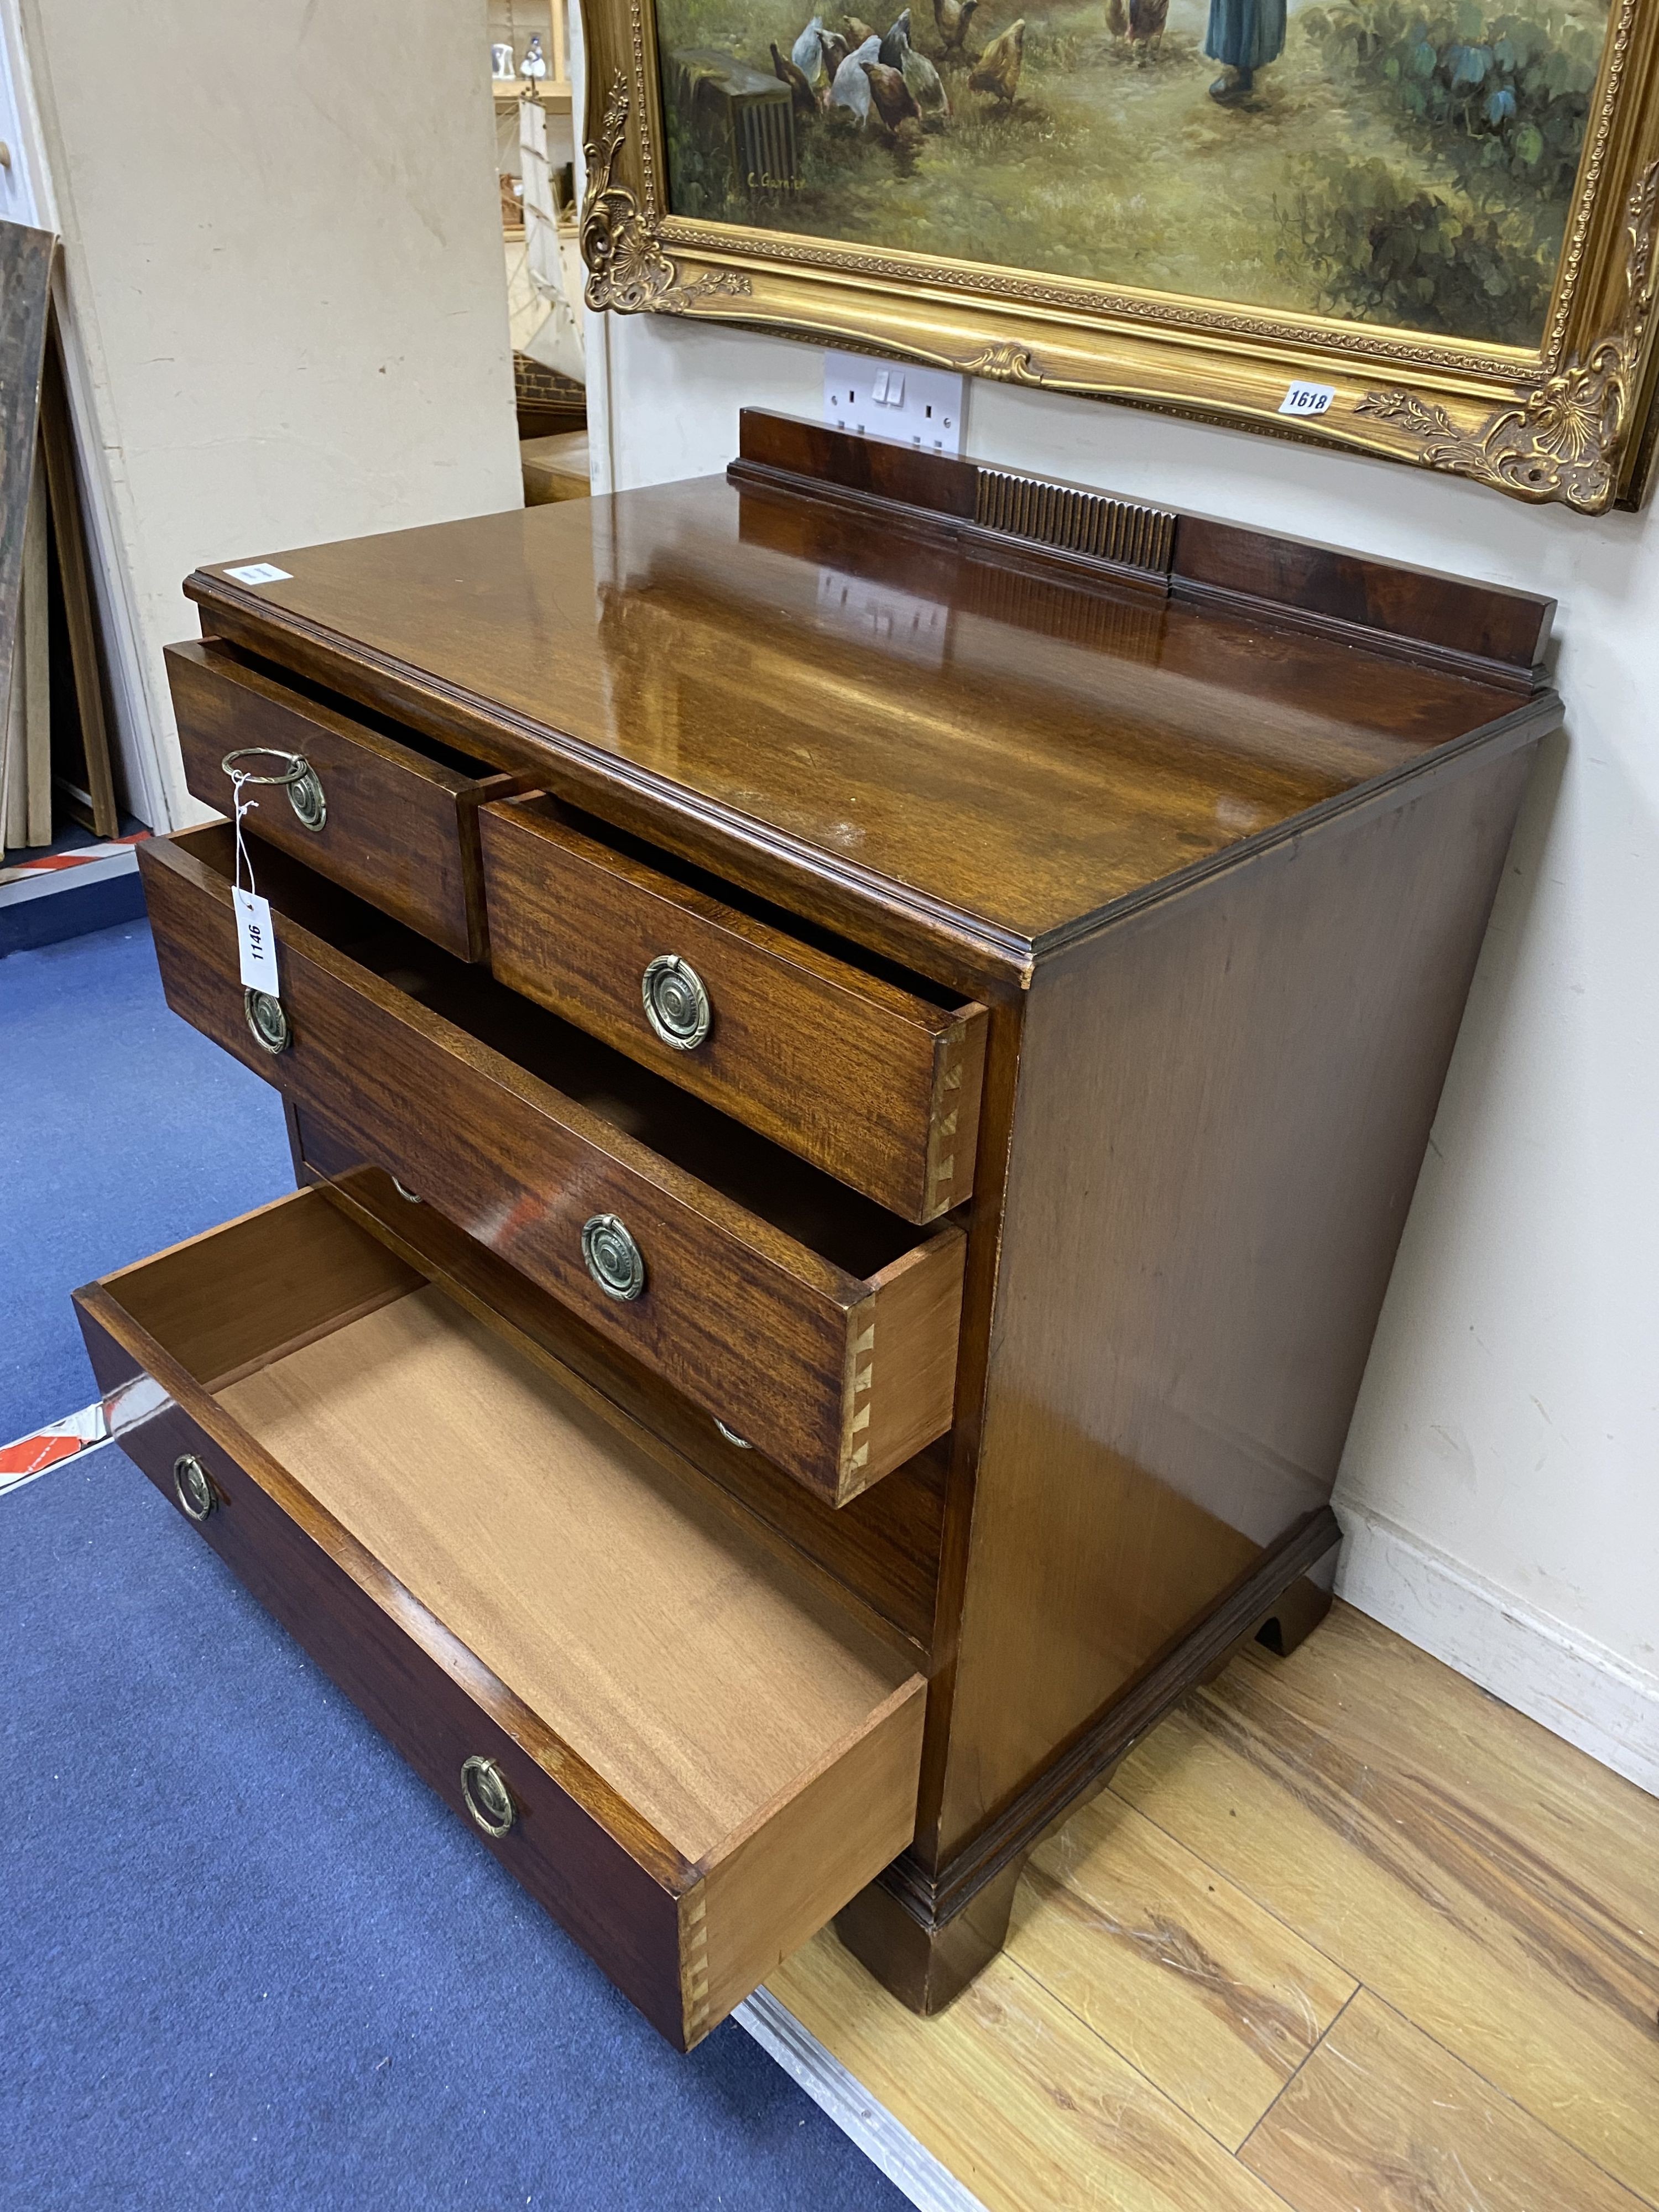 An Edwardian mahogany chest of drawers, width 76cm, depth 52cm, height 84cm